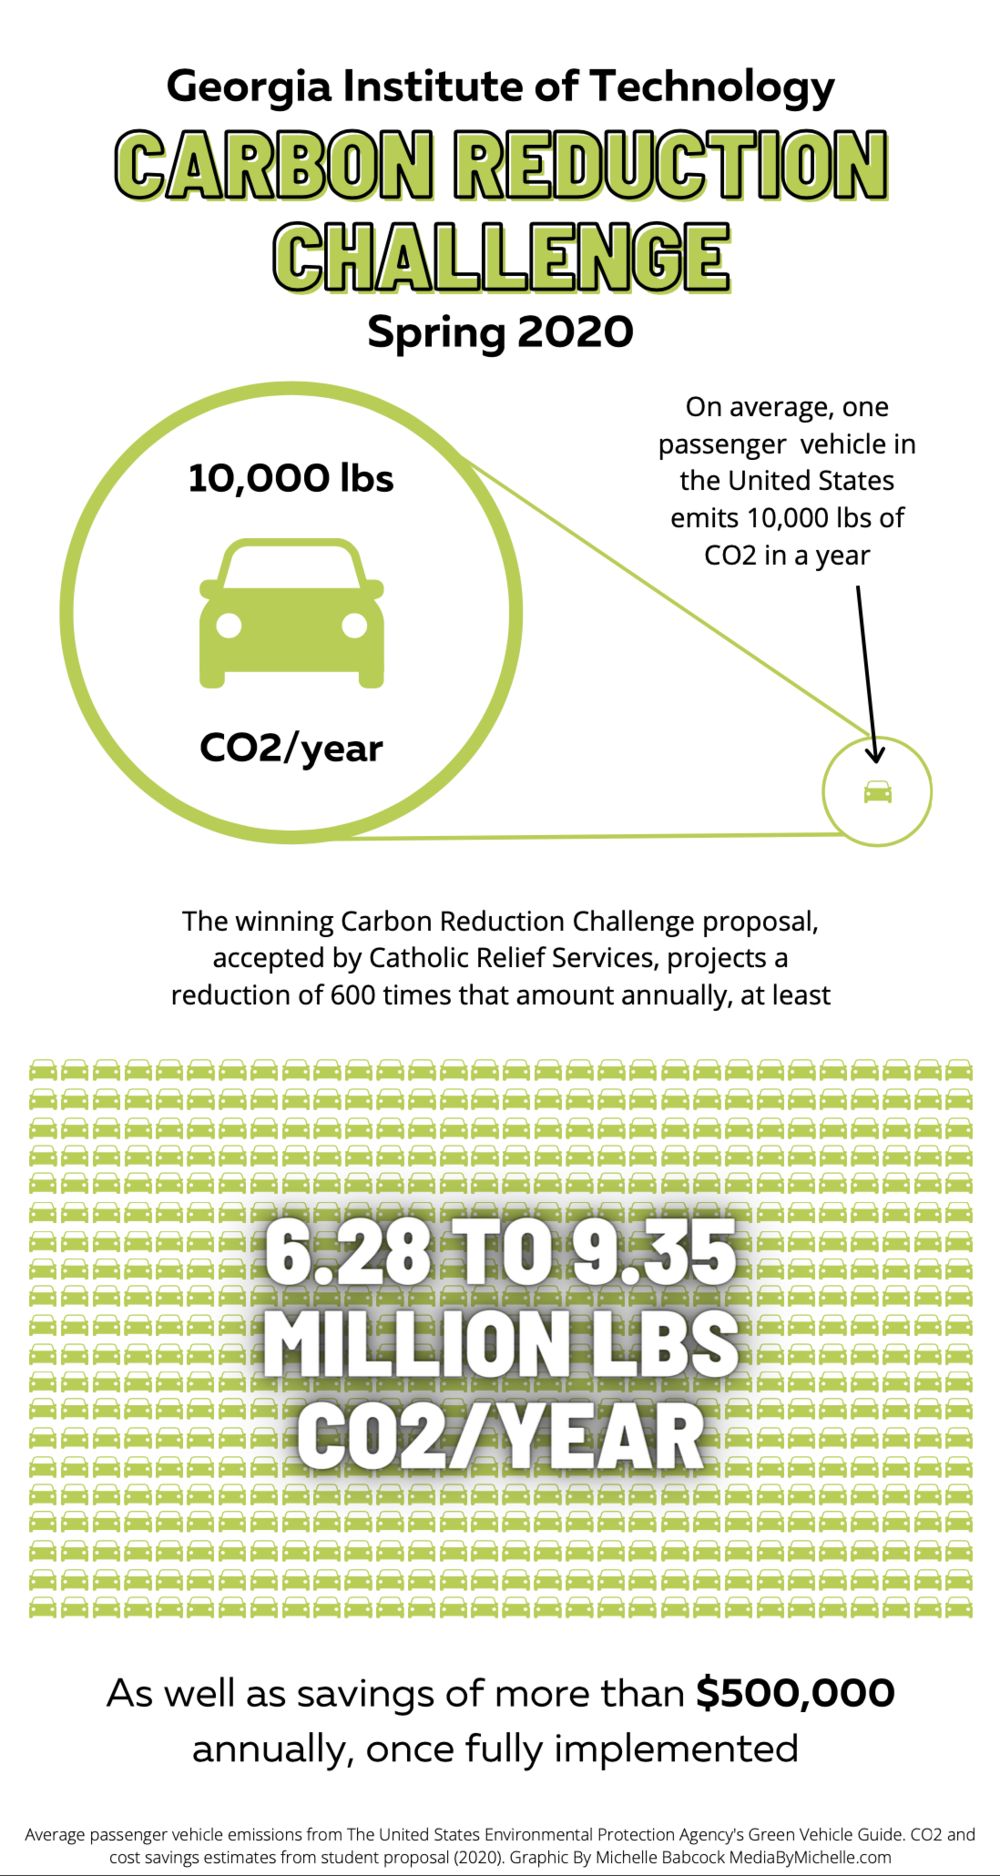 A graphic depicting projected annual savings from the winners of the Spring 2020 Carbon Reduction Challenge.